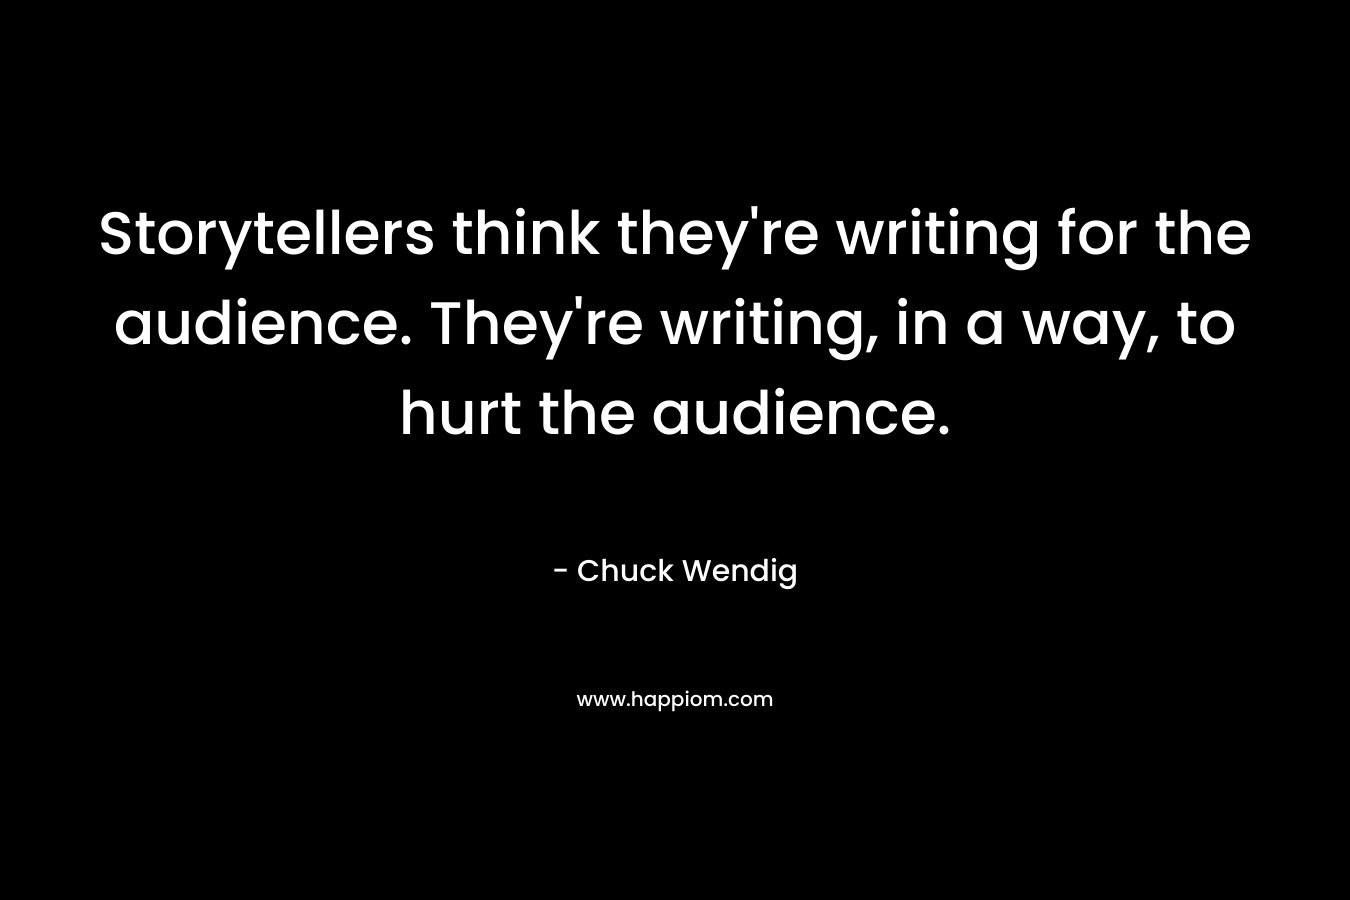 Storytellers think they’re writing for the audience. They’re writing, in a way, to hurt the audience. – Chuck Wendig